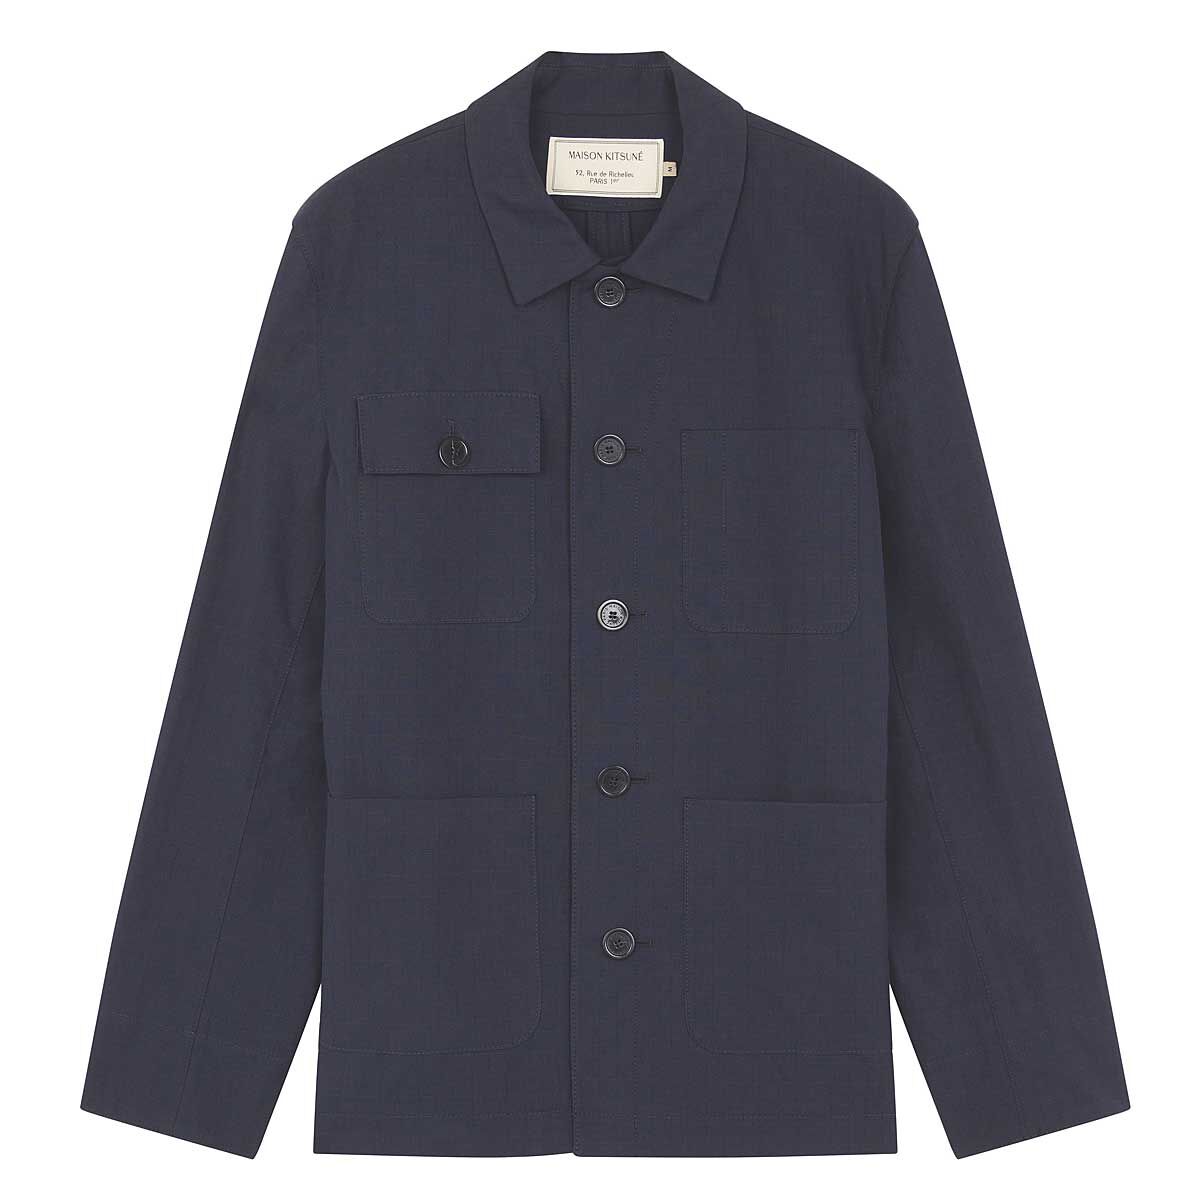 Buy SMALL CHECK WORKER JACKET for N/A 0.0 on KICKZ.com!